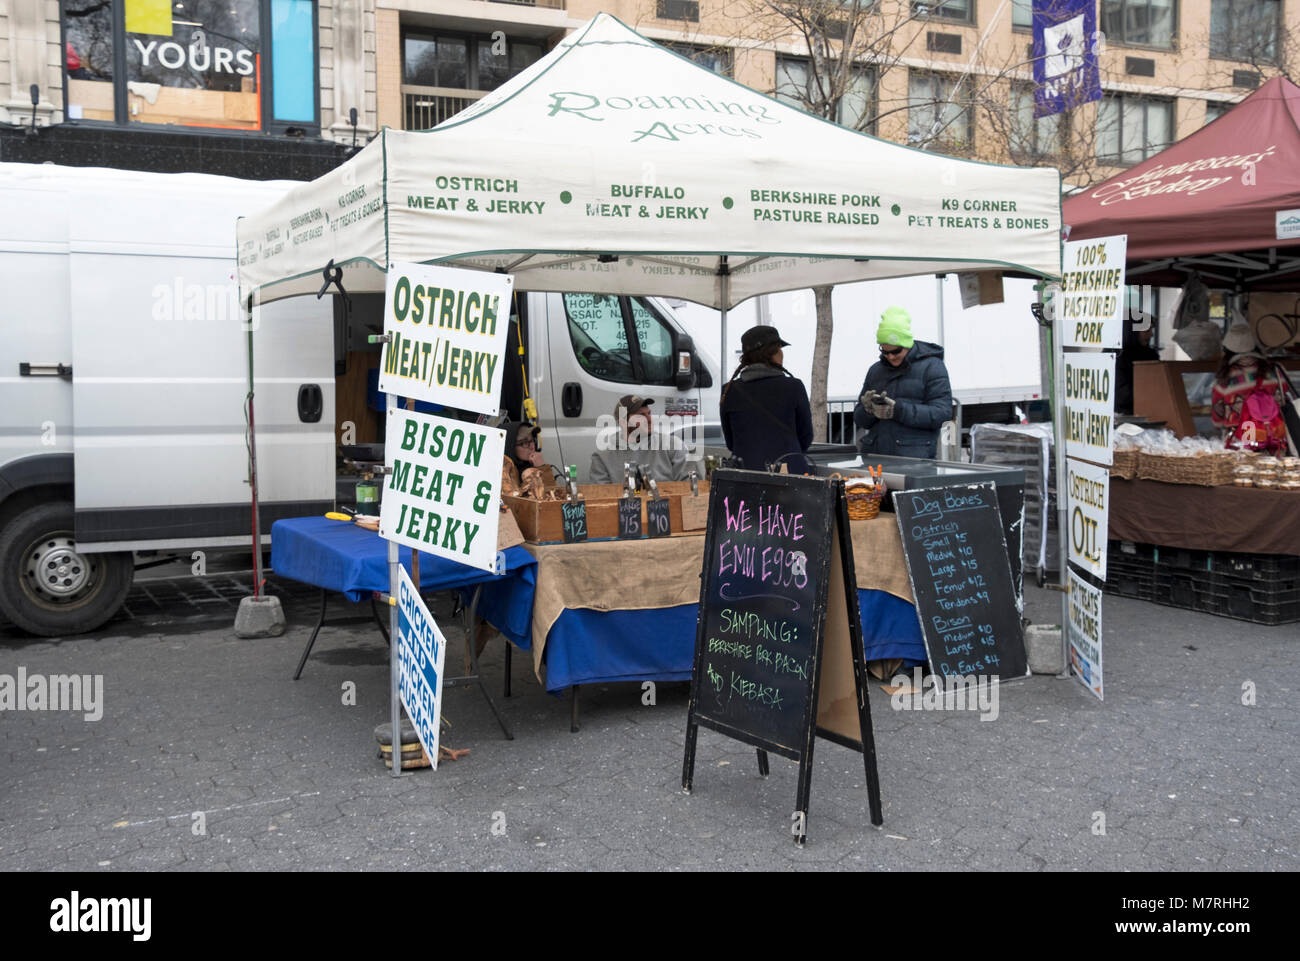 A butcher stand at the Union Square Green Market selling unusual meats including bison, ostrich and buffalo. In Manhattan, New York City. Stock Photo